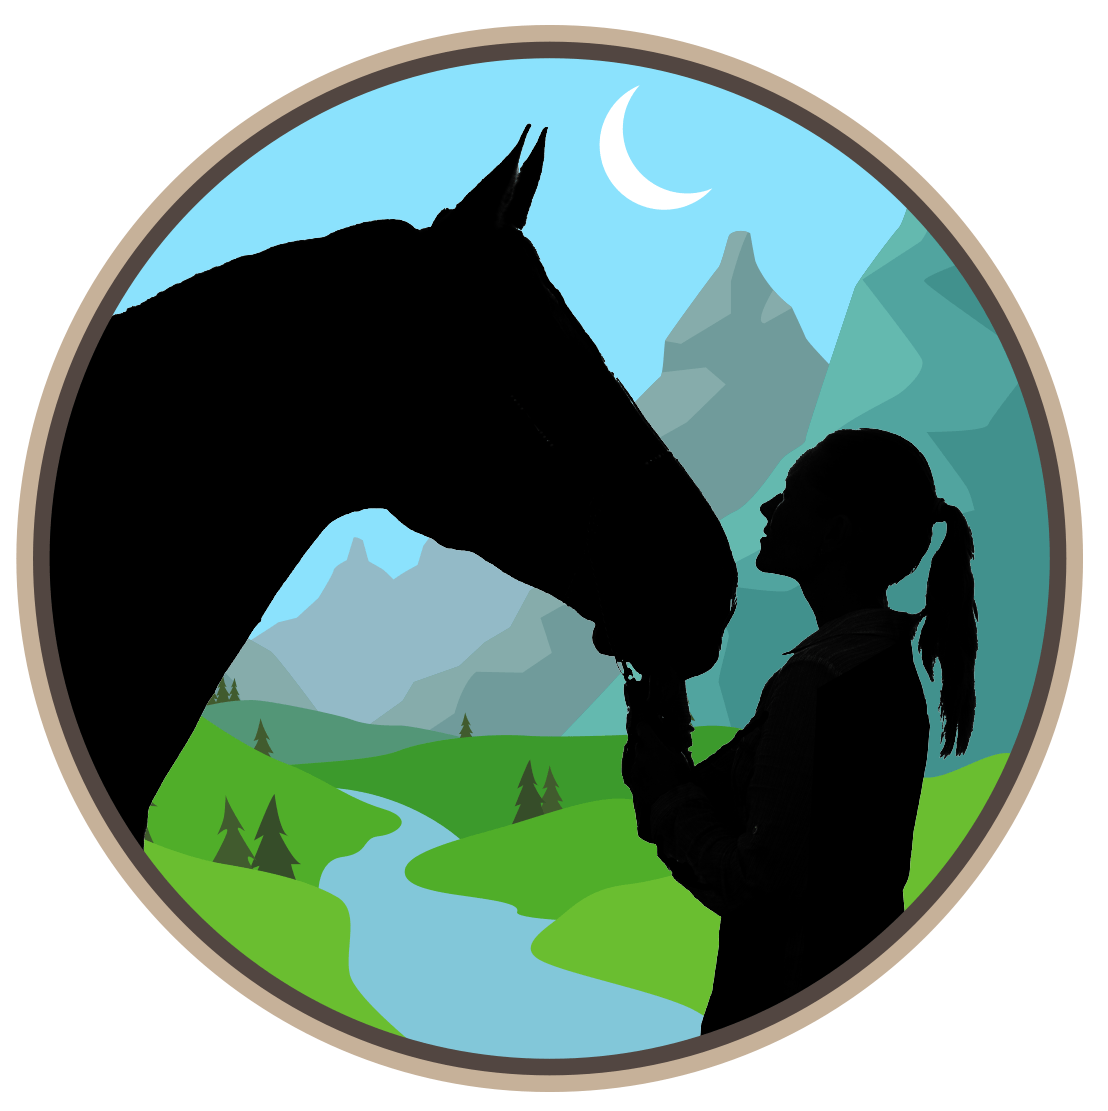 Horse Mountain Logo - Non-Profit Mountain River Youth Ranch gets new logo and website ...